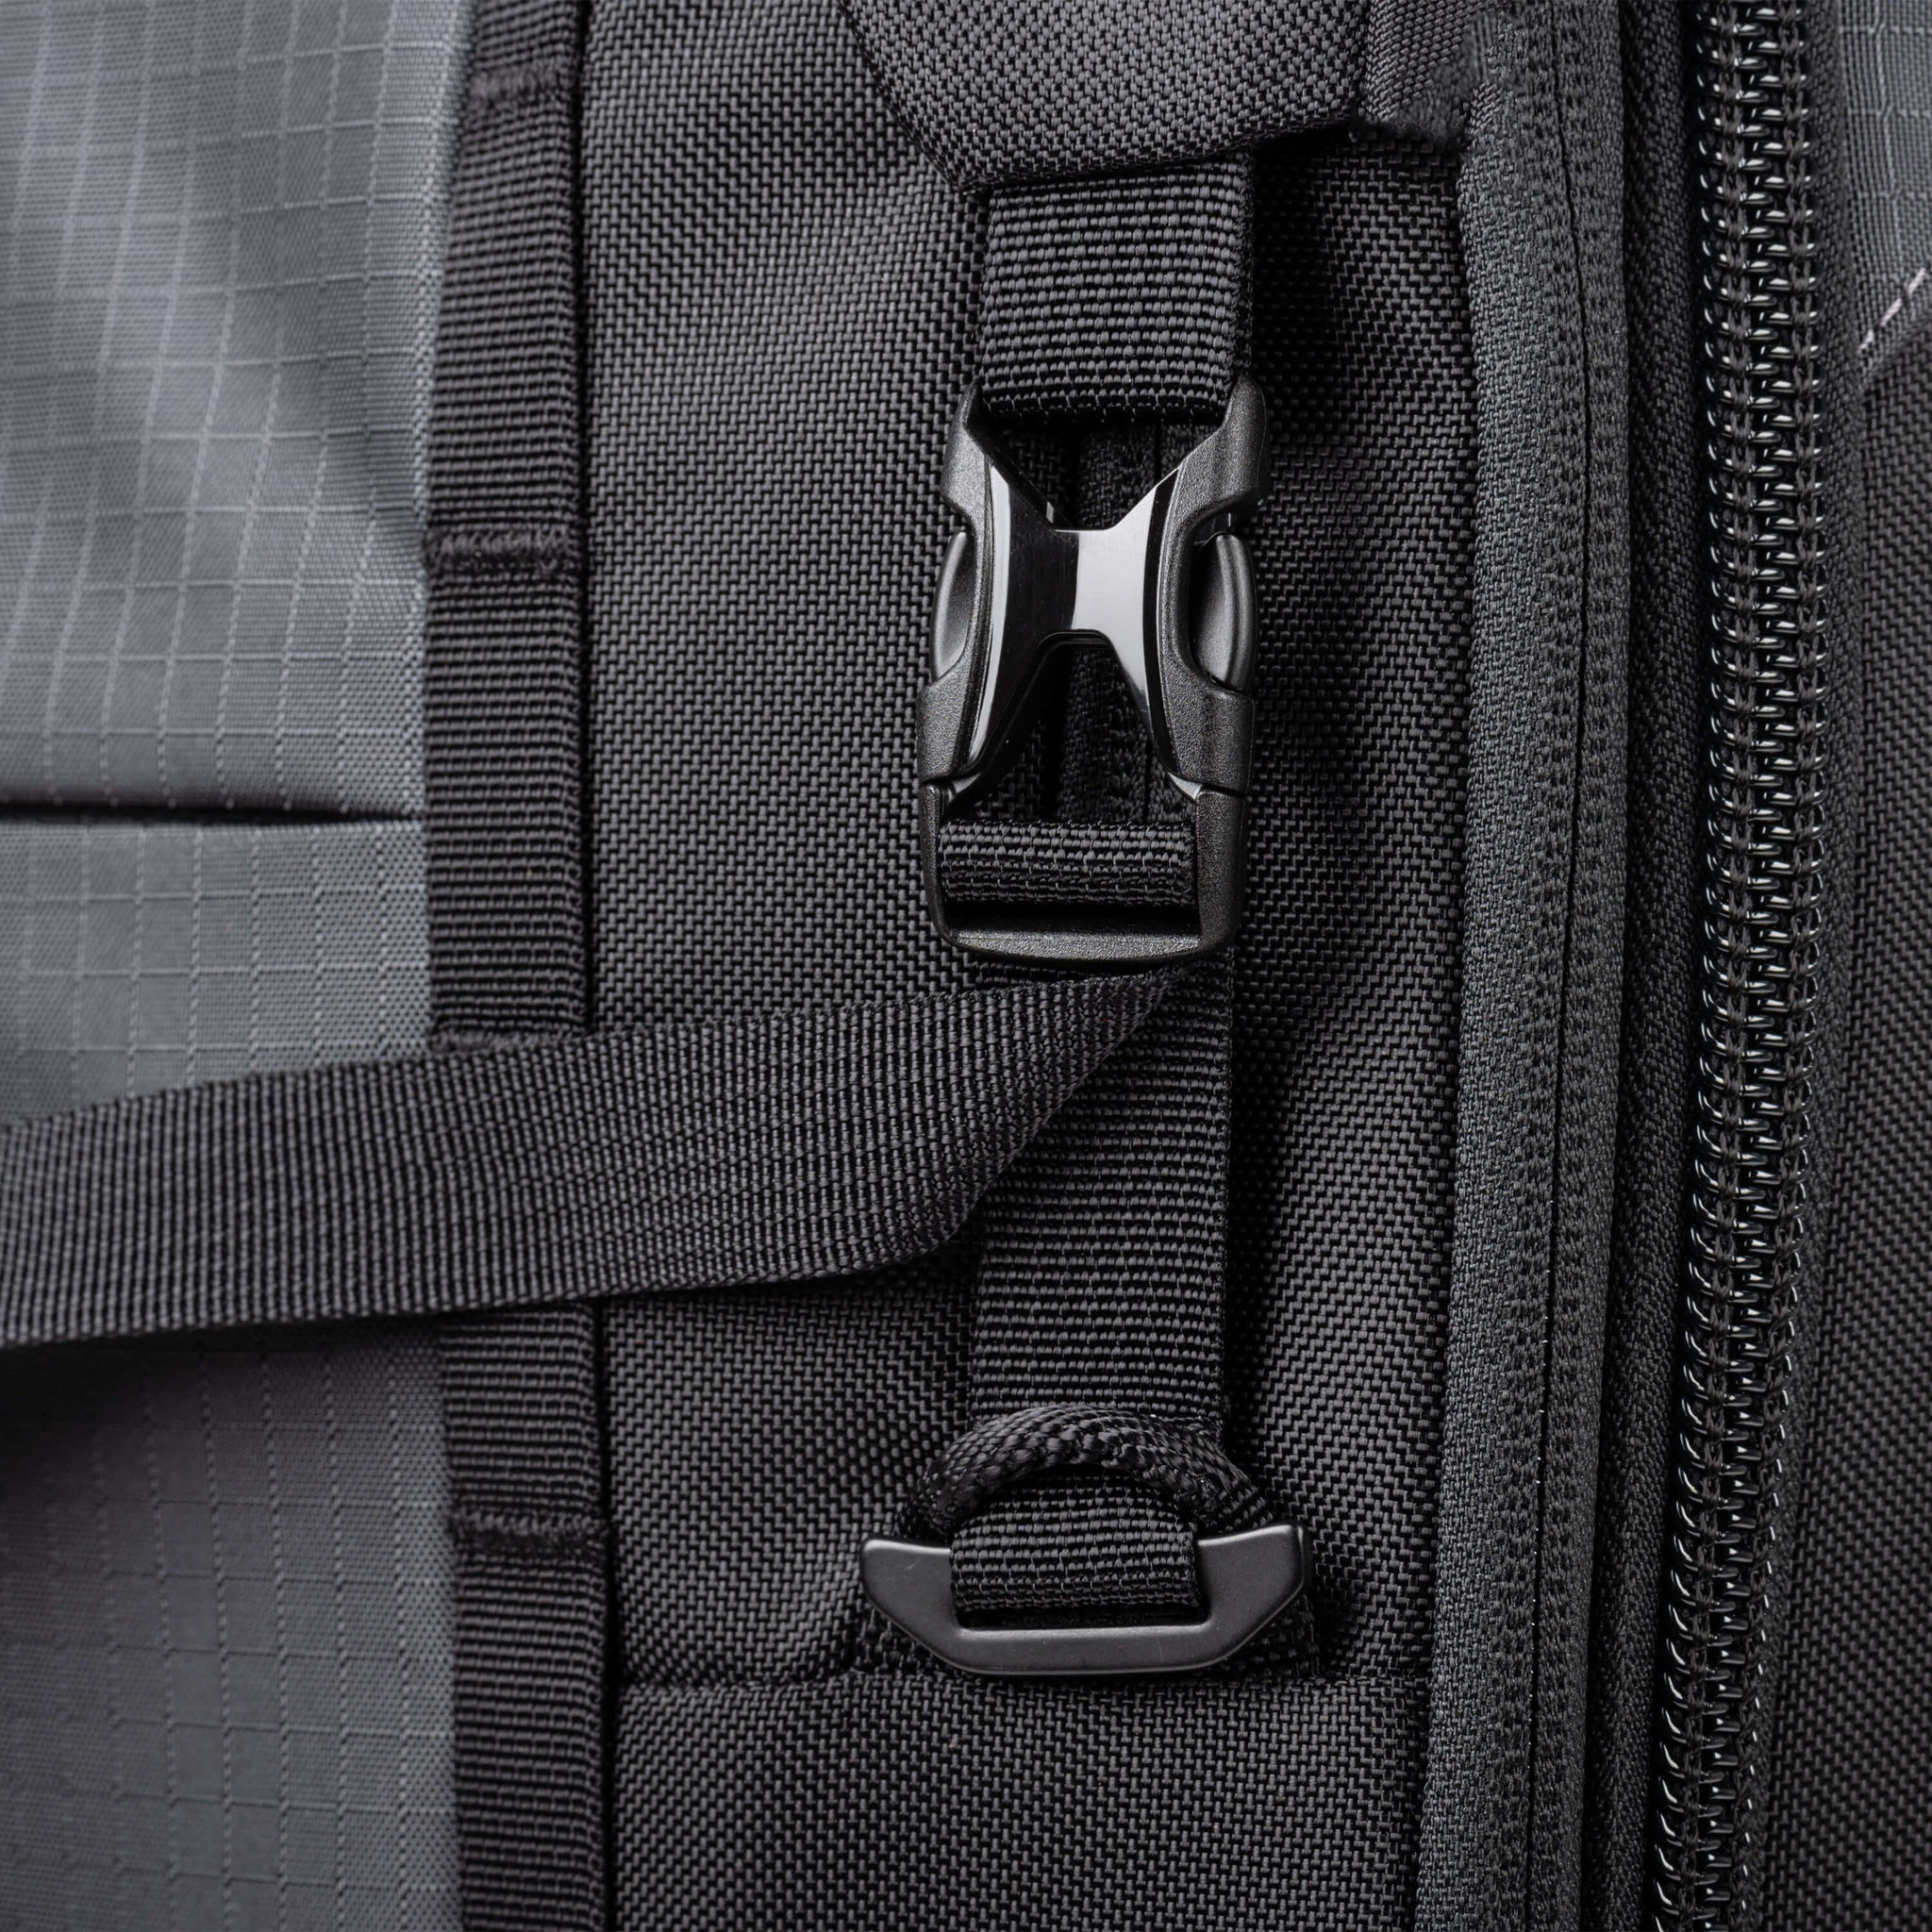 Detail of removable top pocket attachment point